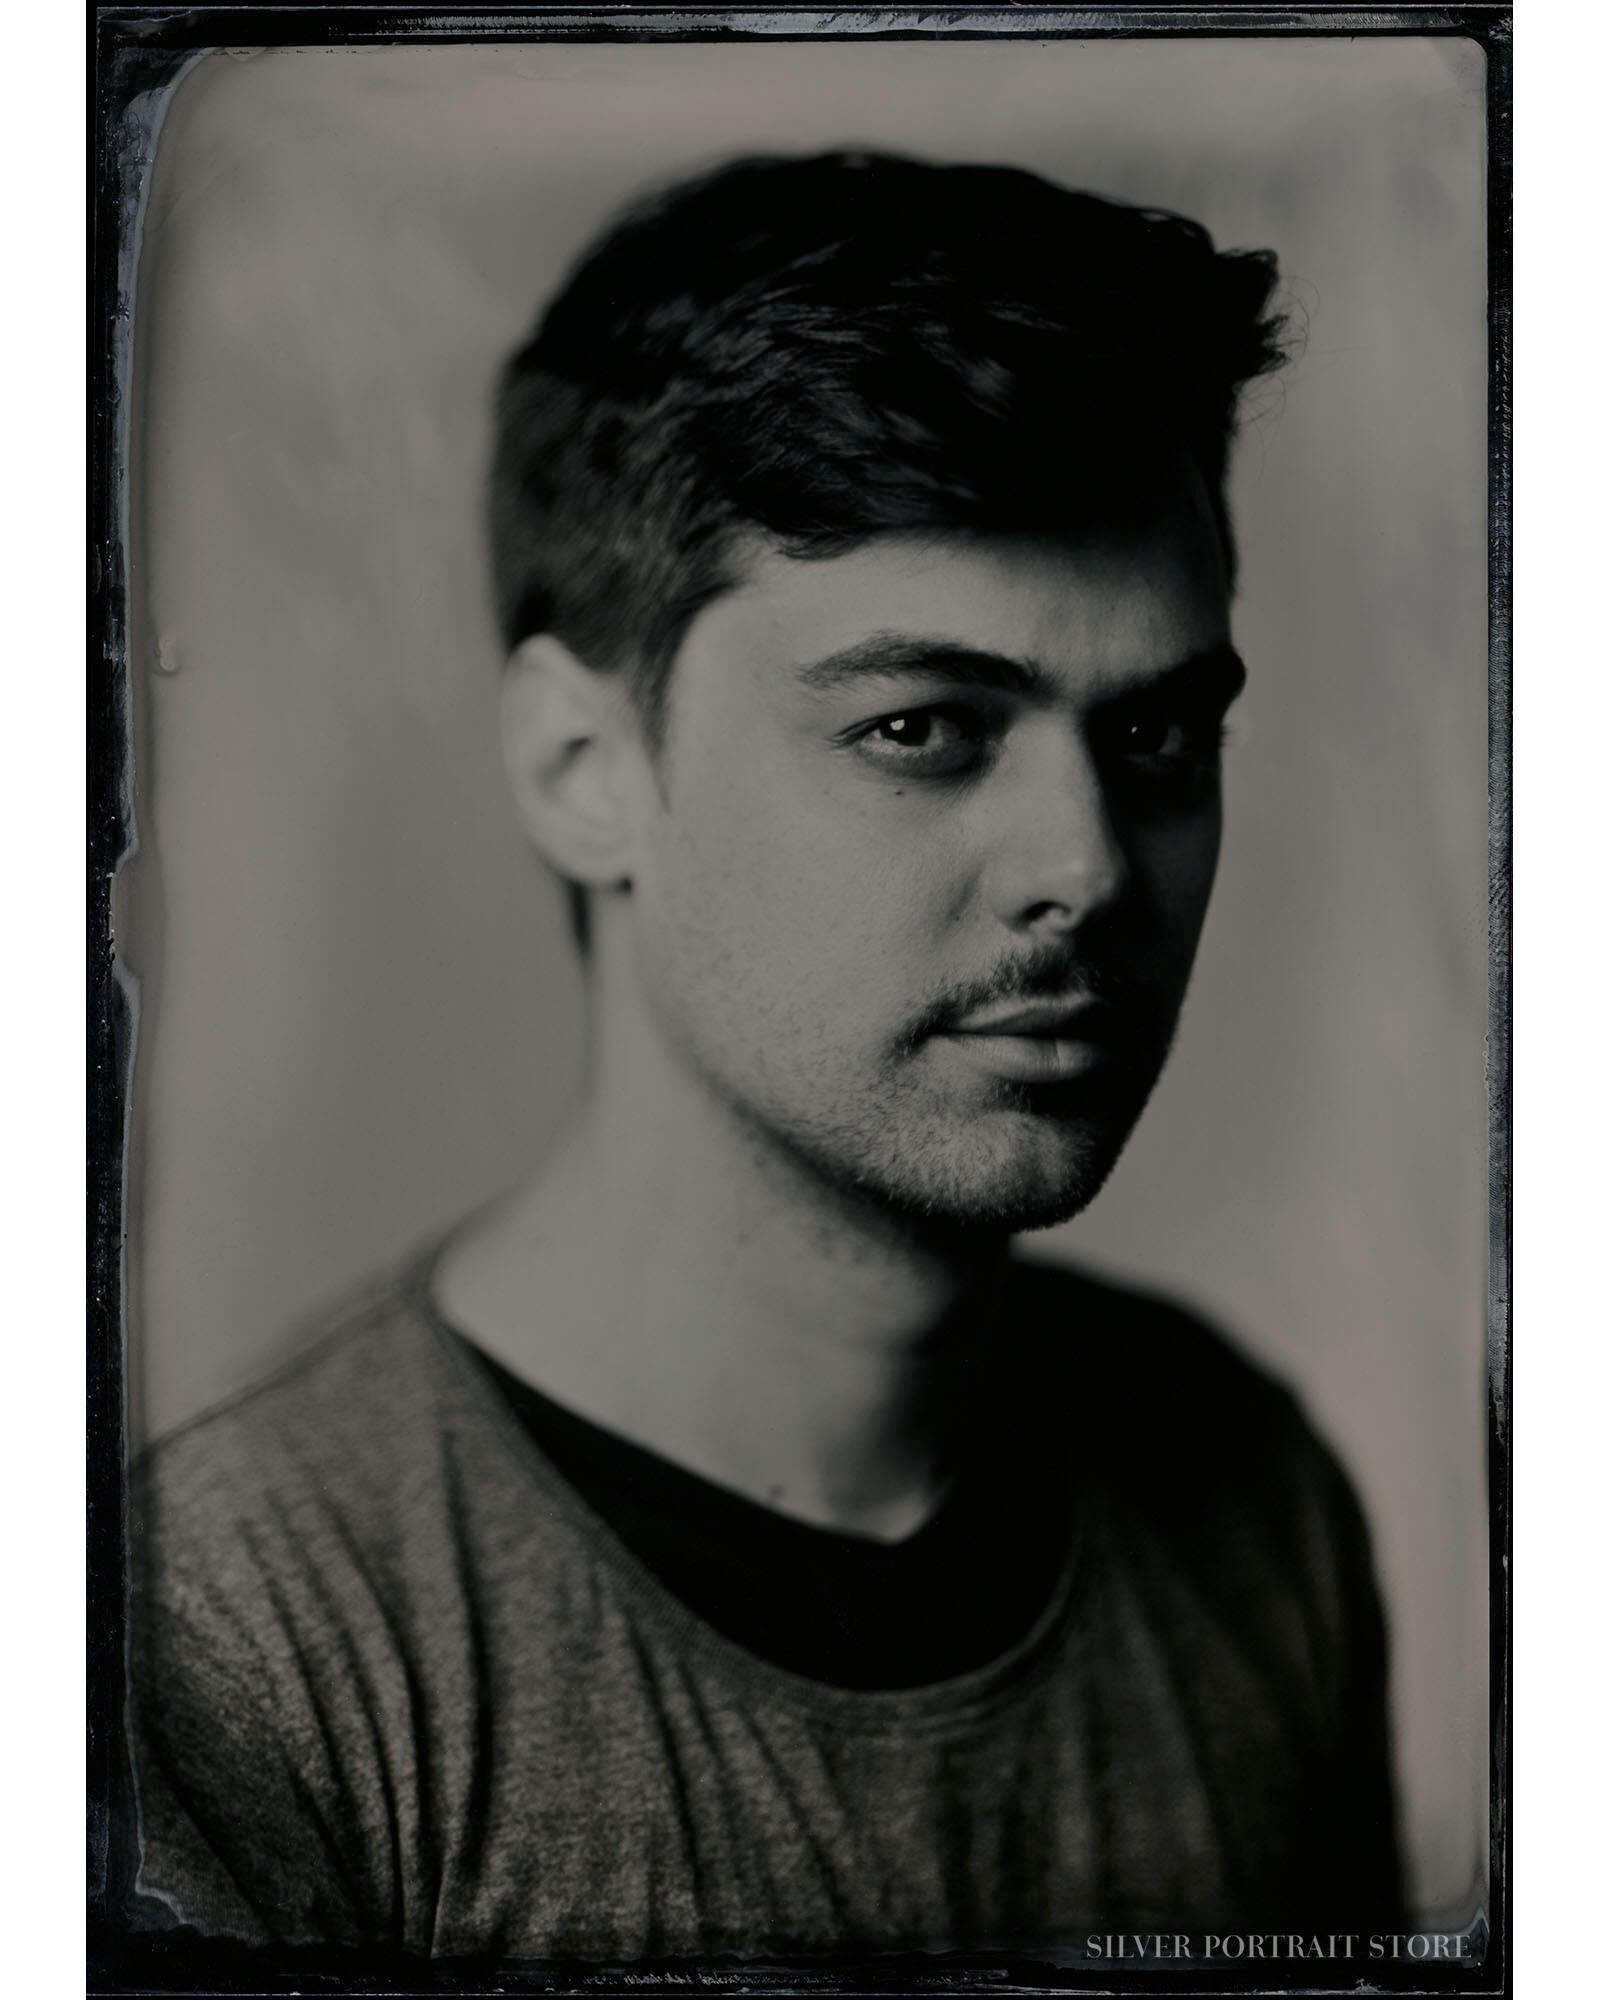 James-Silver Portrait Store-Scan from Wet plate collodion-Tintype 13 x 18 cm.